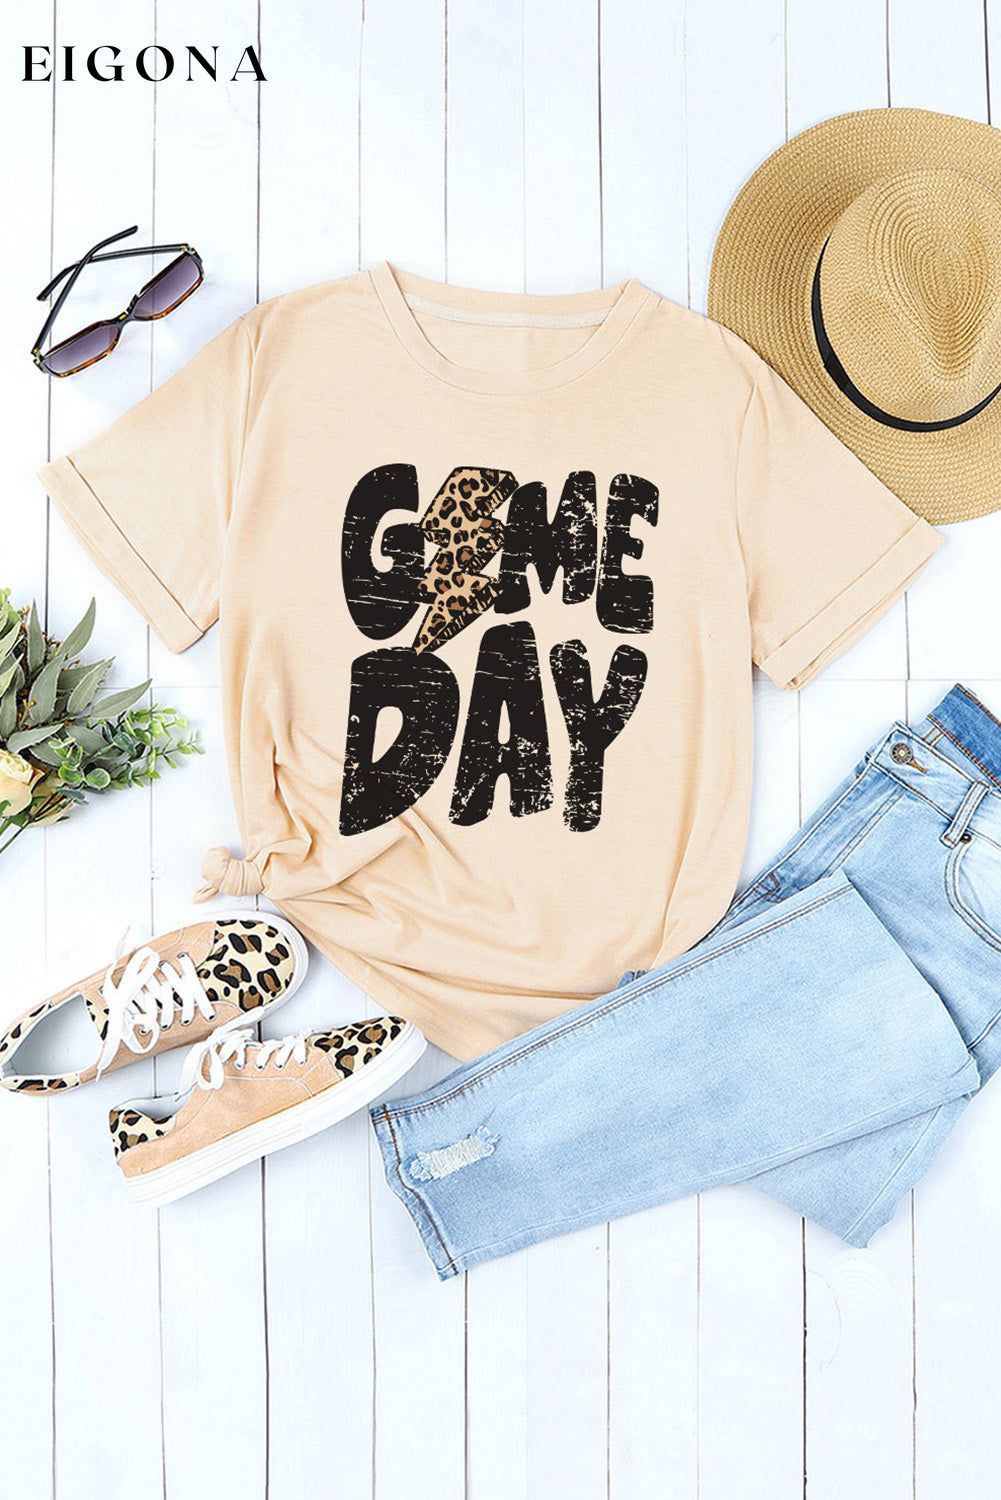 GAME DAY Graphic Short Sleeve T-Shirt clothes Ship From Overseas SYNZ t-shirt top trend